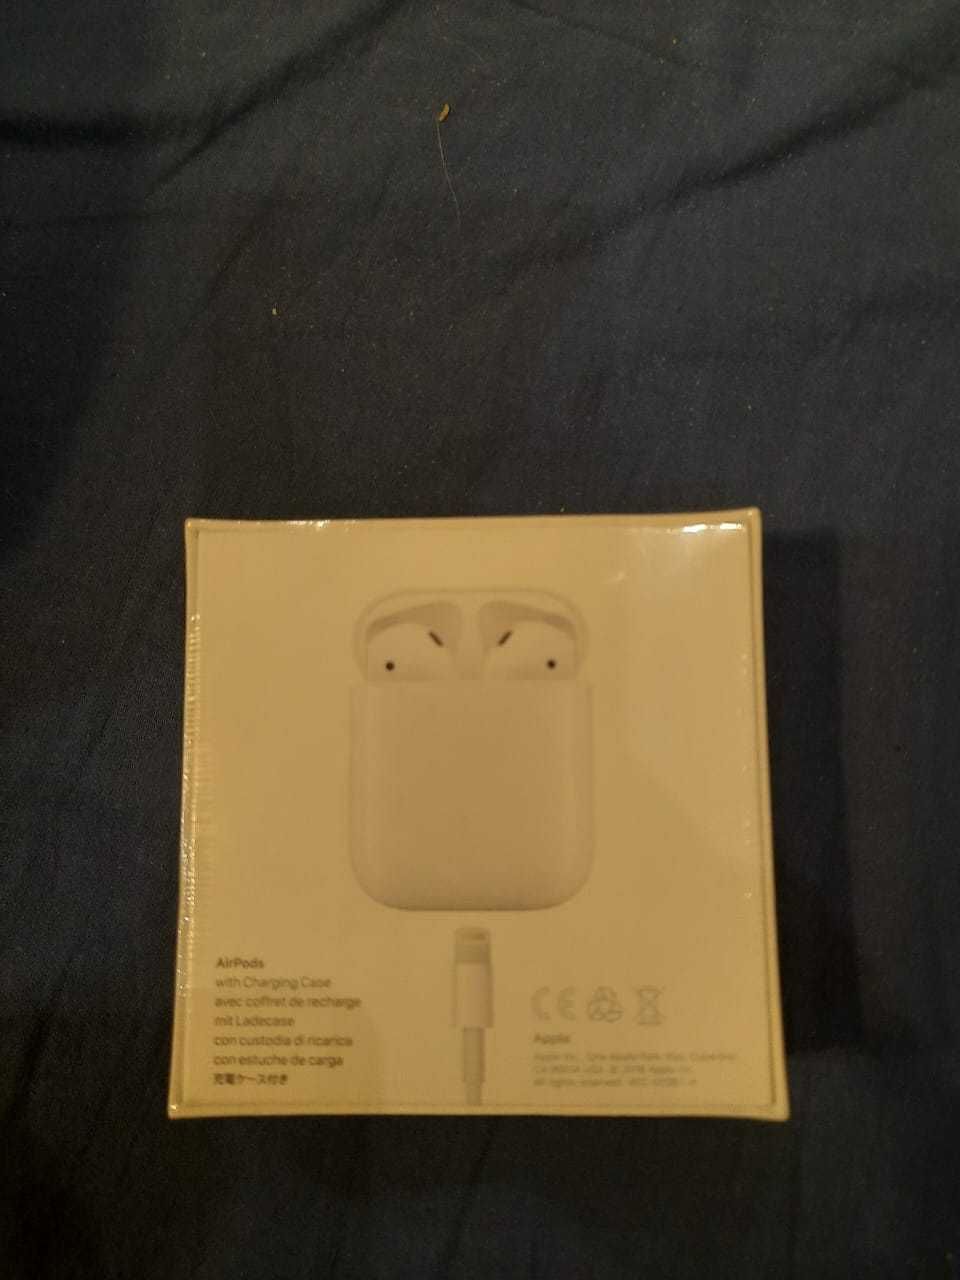 Apple AirPods with Charging Case (MV7N2RU/A)